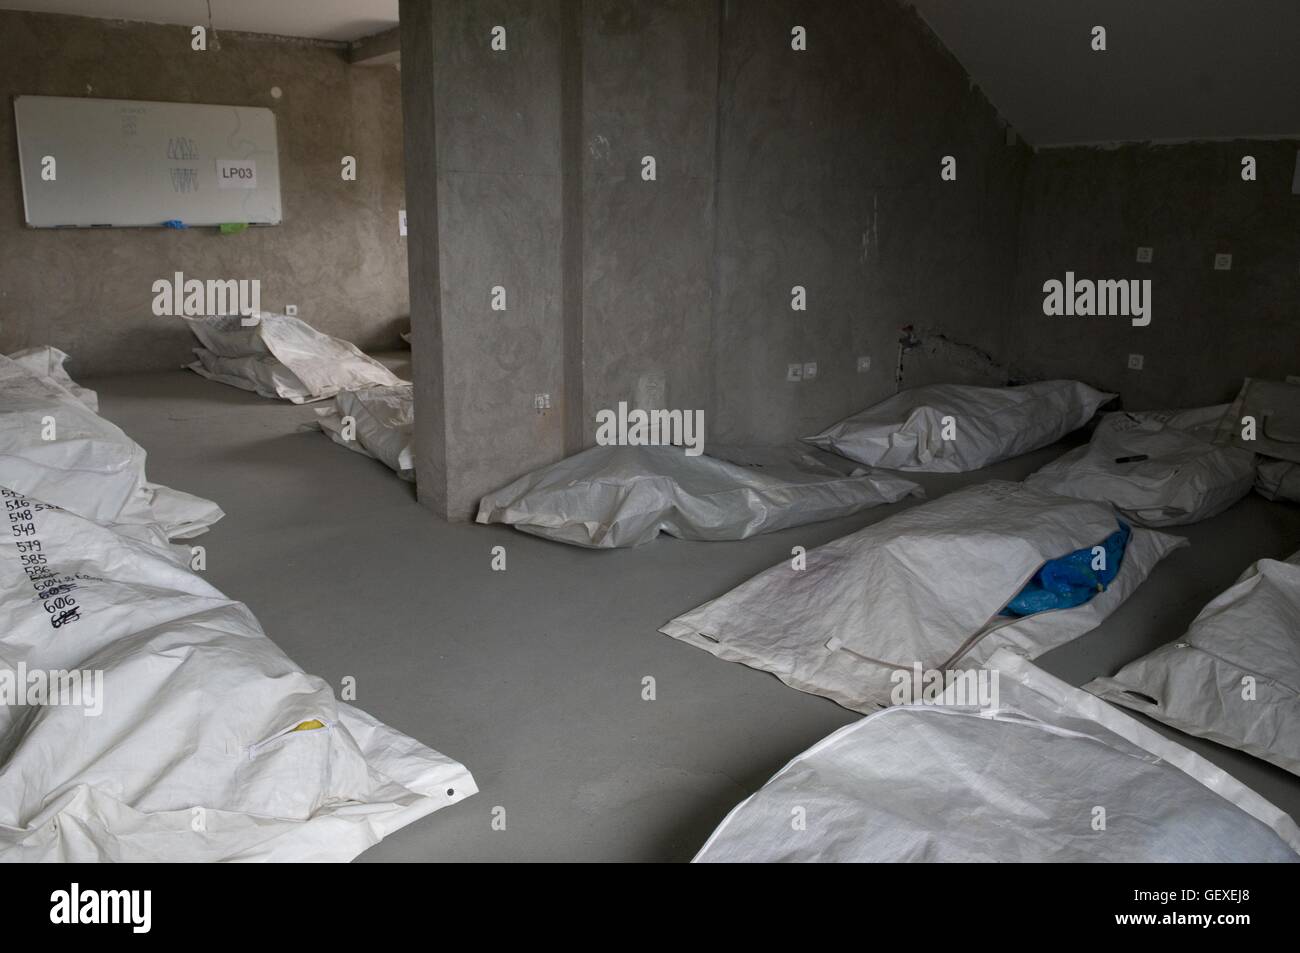 Remains of a victims of the Srebrenica massacre lying inside plastic bags at the mortuary facility of the International Commission on Missing Persons (ICMP) in the industrial town of Tuzla in Bosnia. More than 8,000 Bosnian Muslim men and boys were killed after the Bosnian Serb Army attacked Srebrenica, a designated UN safe area, on 10-11 July 1995, despite the presence of UN peacekeepers. Stock Photo